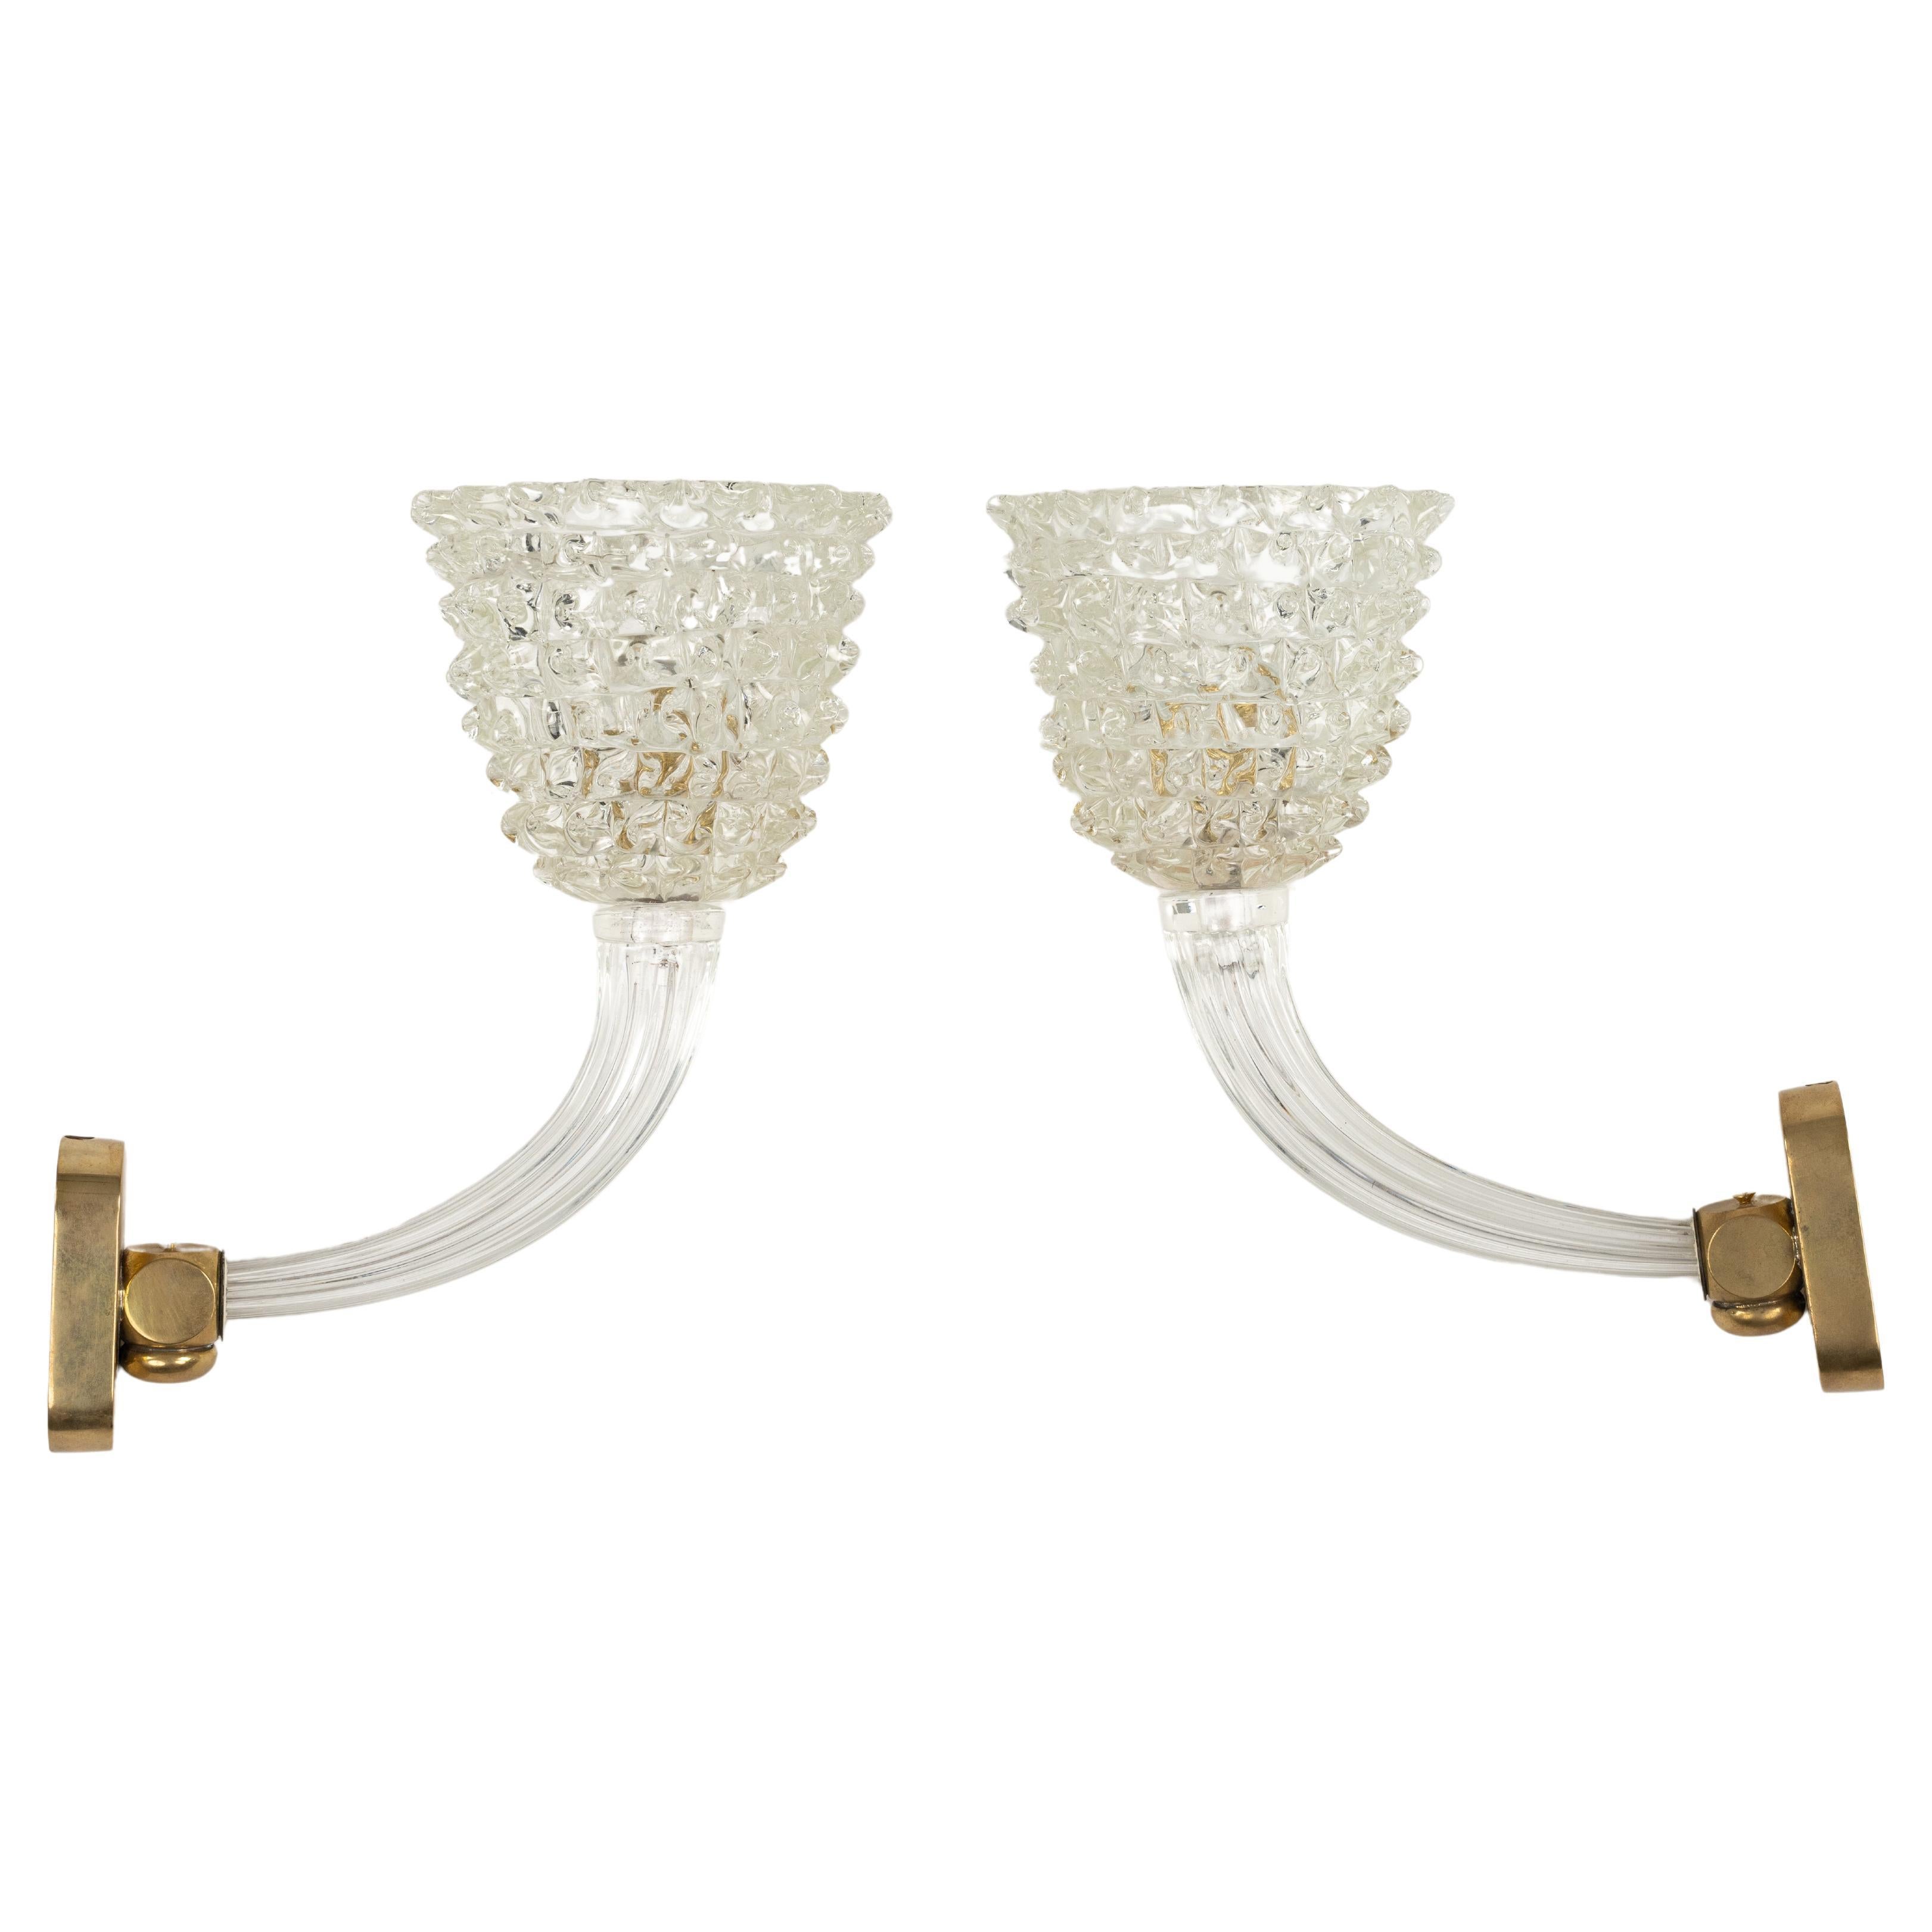 Pair of Sconces Rostrato Murano Glass & Brass Barovier & Toso Style, Italy 1950s For Sale